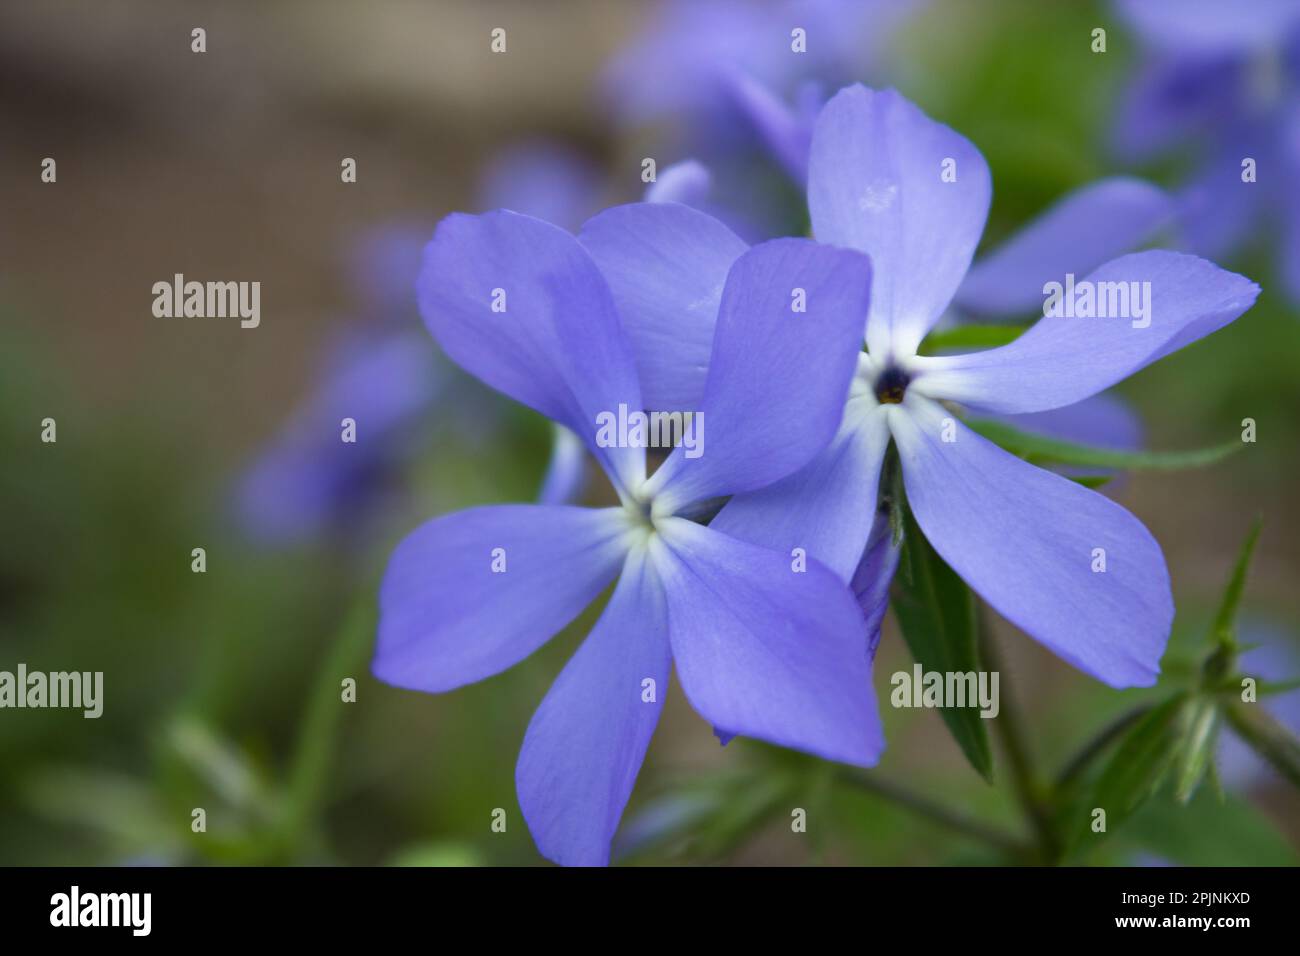 care and growing of spring flowers Vinca herbacea Stock Photo